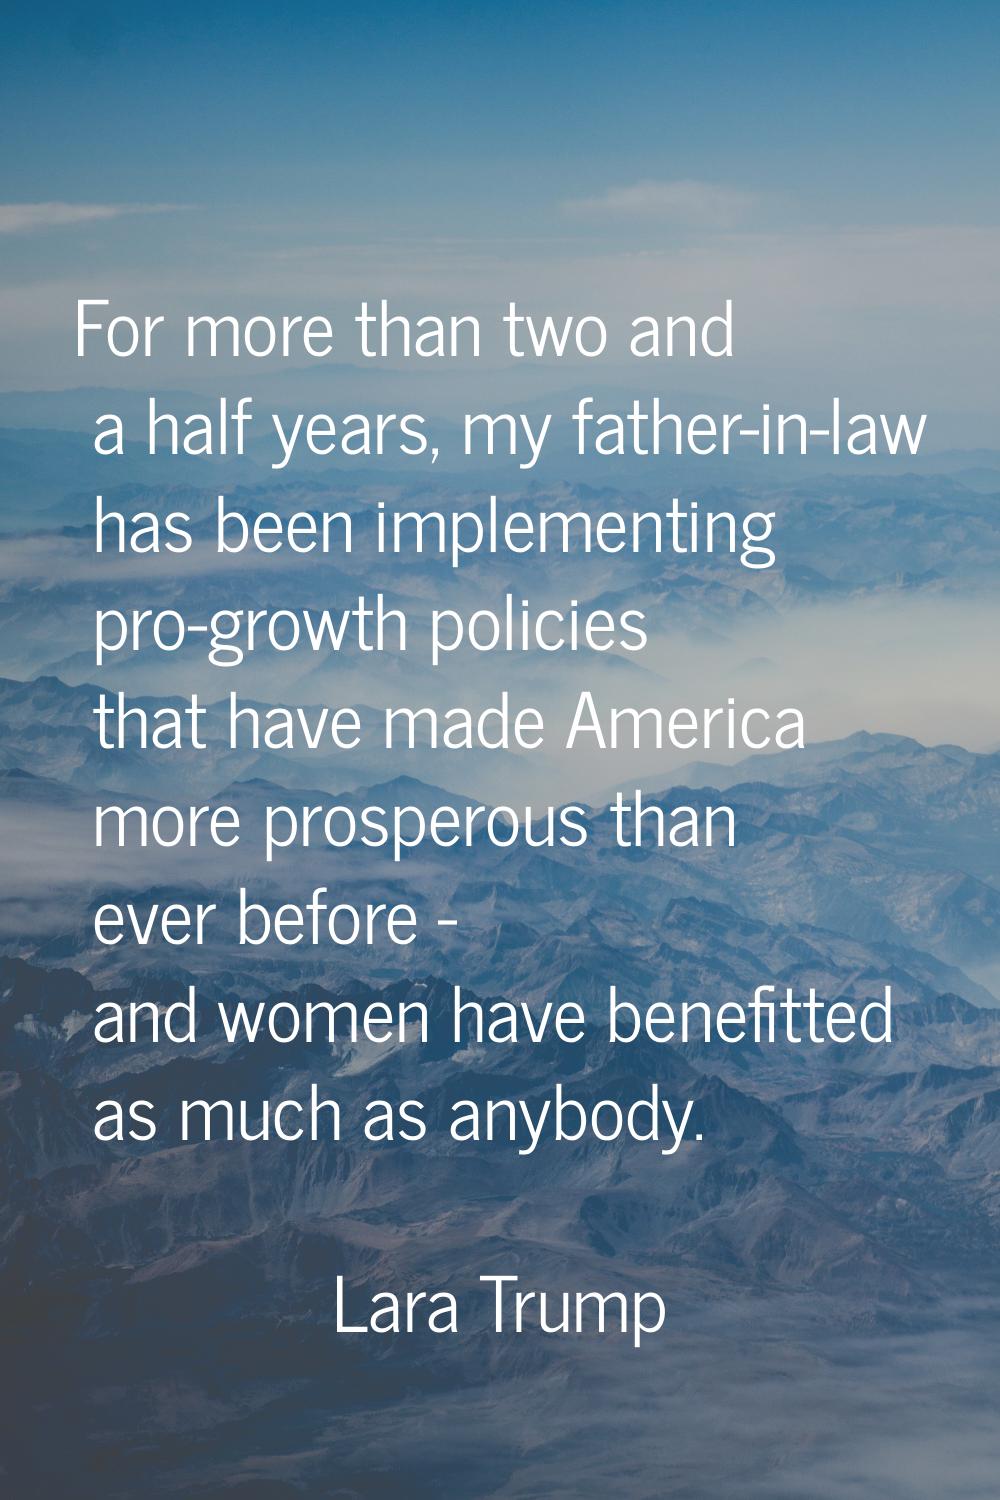 For more than two and a half years, my father-in-law has been implementing pro-growth policies that